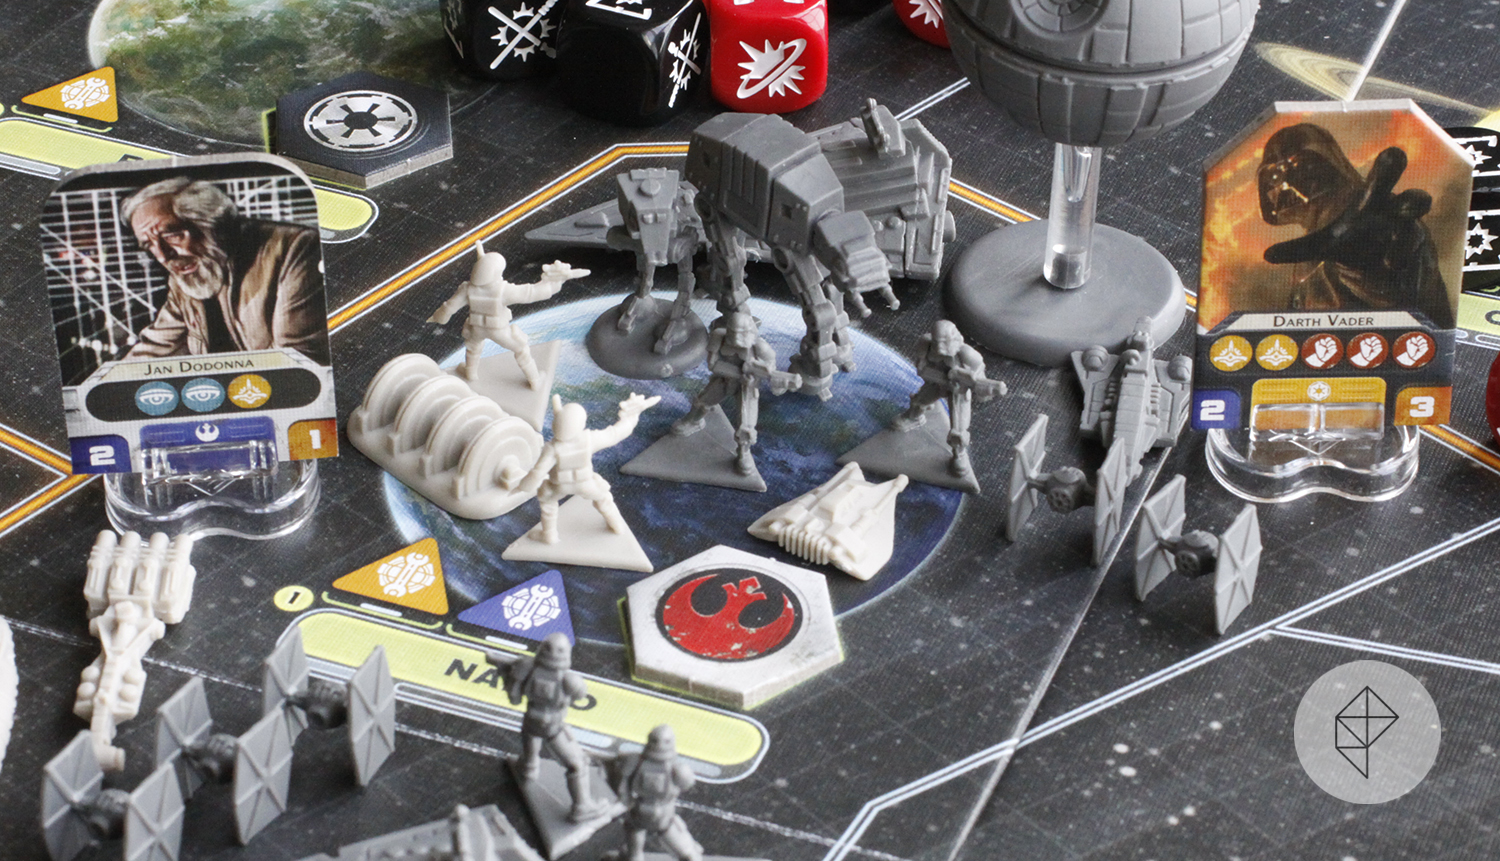 A battle on the planet Naboo in Star Wars Rebellion. The board is filled with plastic miniatures, including rebel commandoes, storm troopers, and AT-AT.